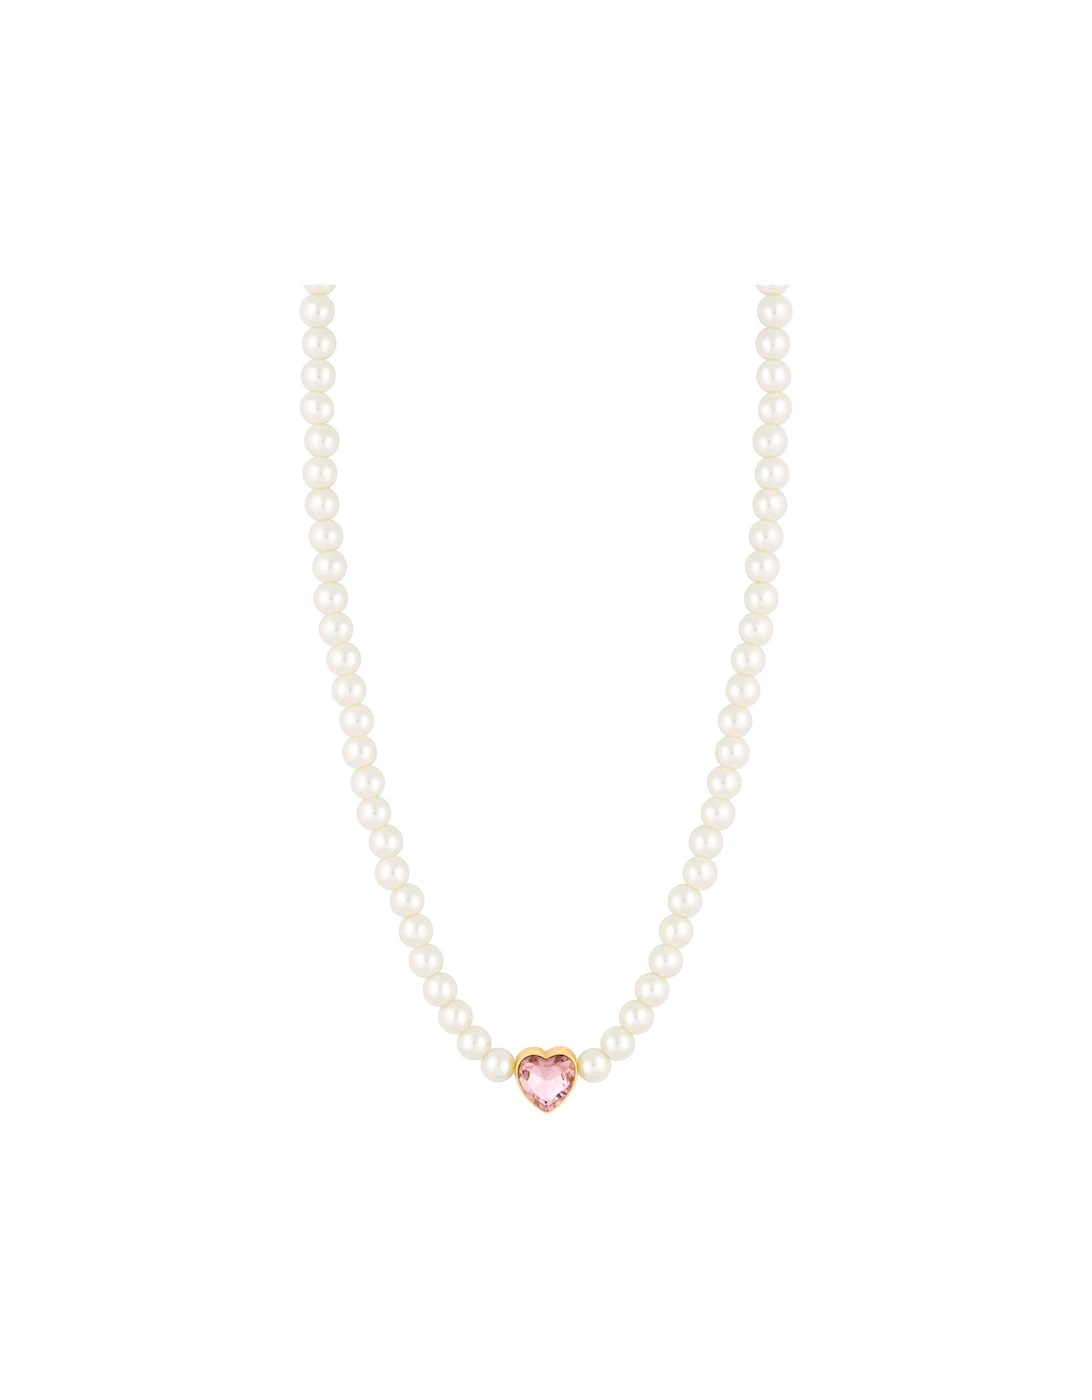 Pearl Pink Heart Choker Necklace - Gift Boxed